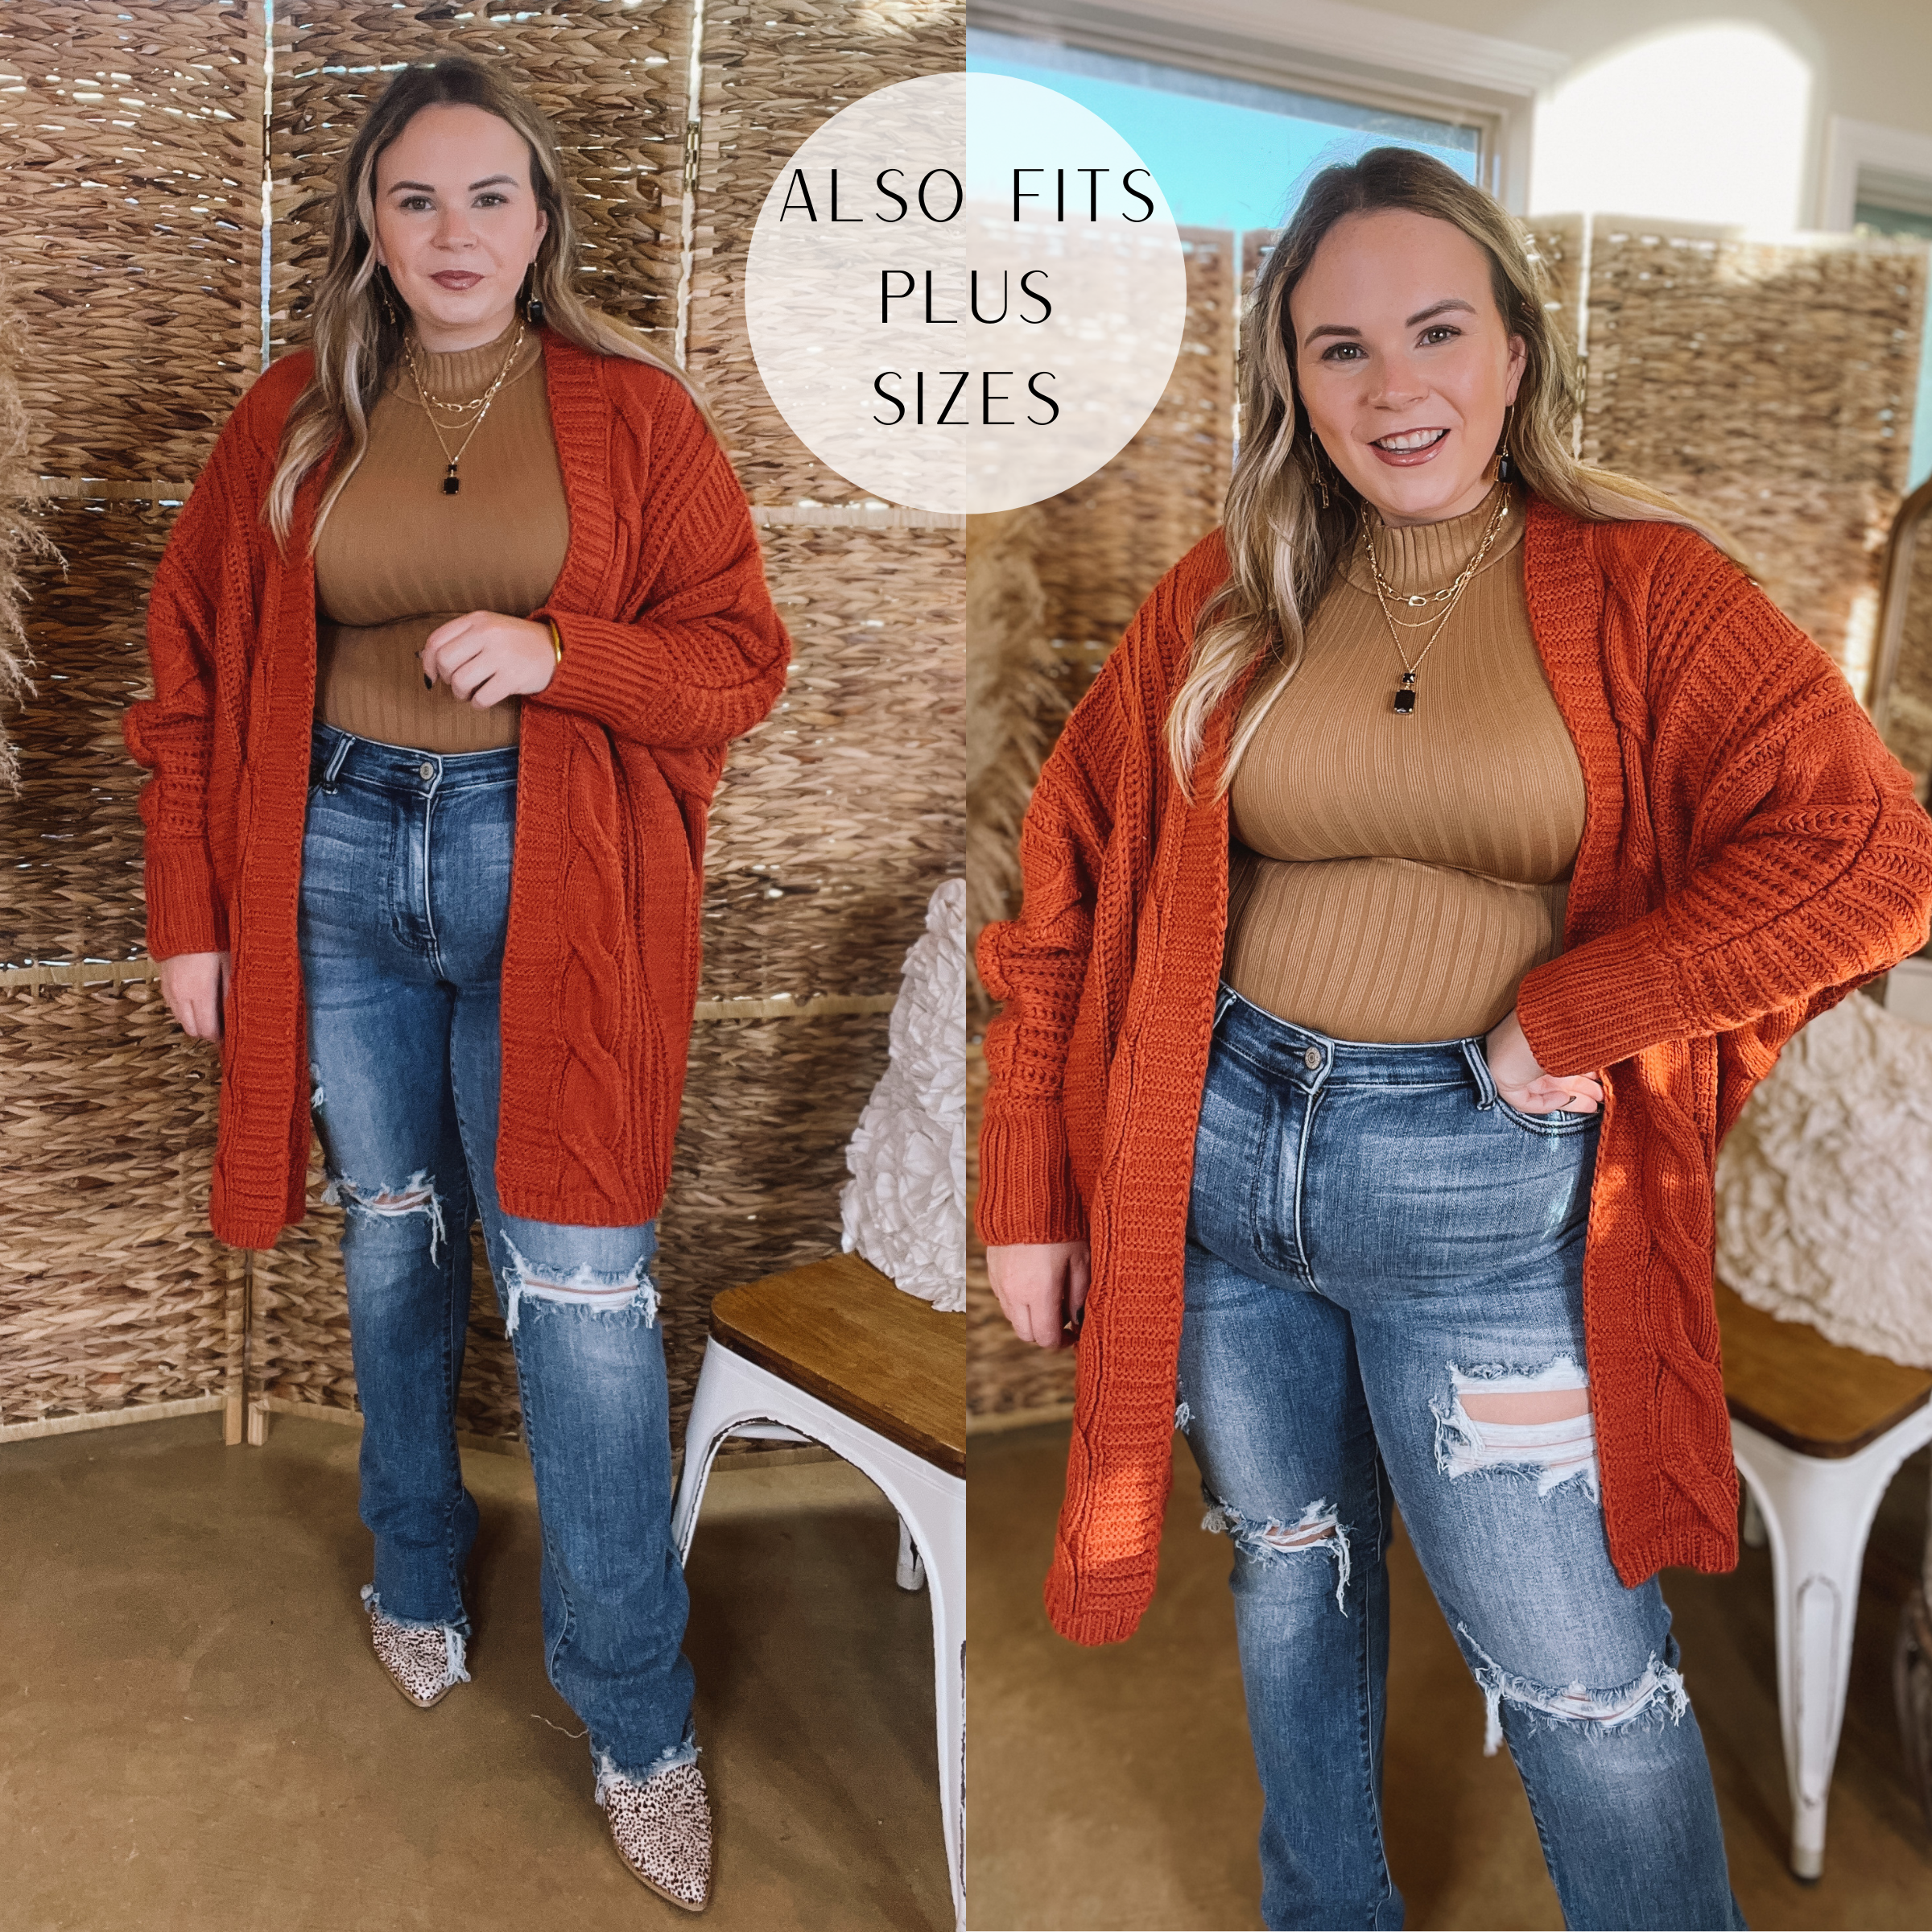 Caramel Spice Kisses Long Sleeve Dolman Cardigan in Rust - Giddy Up Glamour Boutique